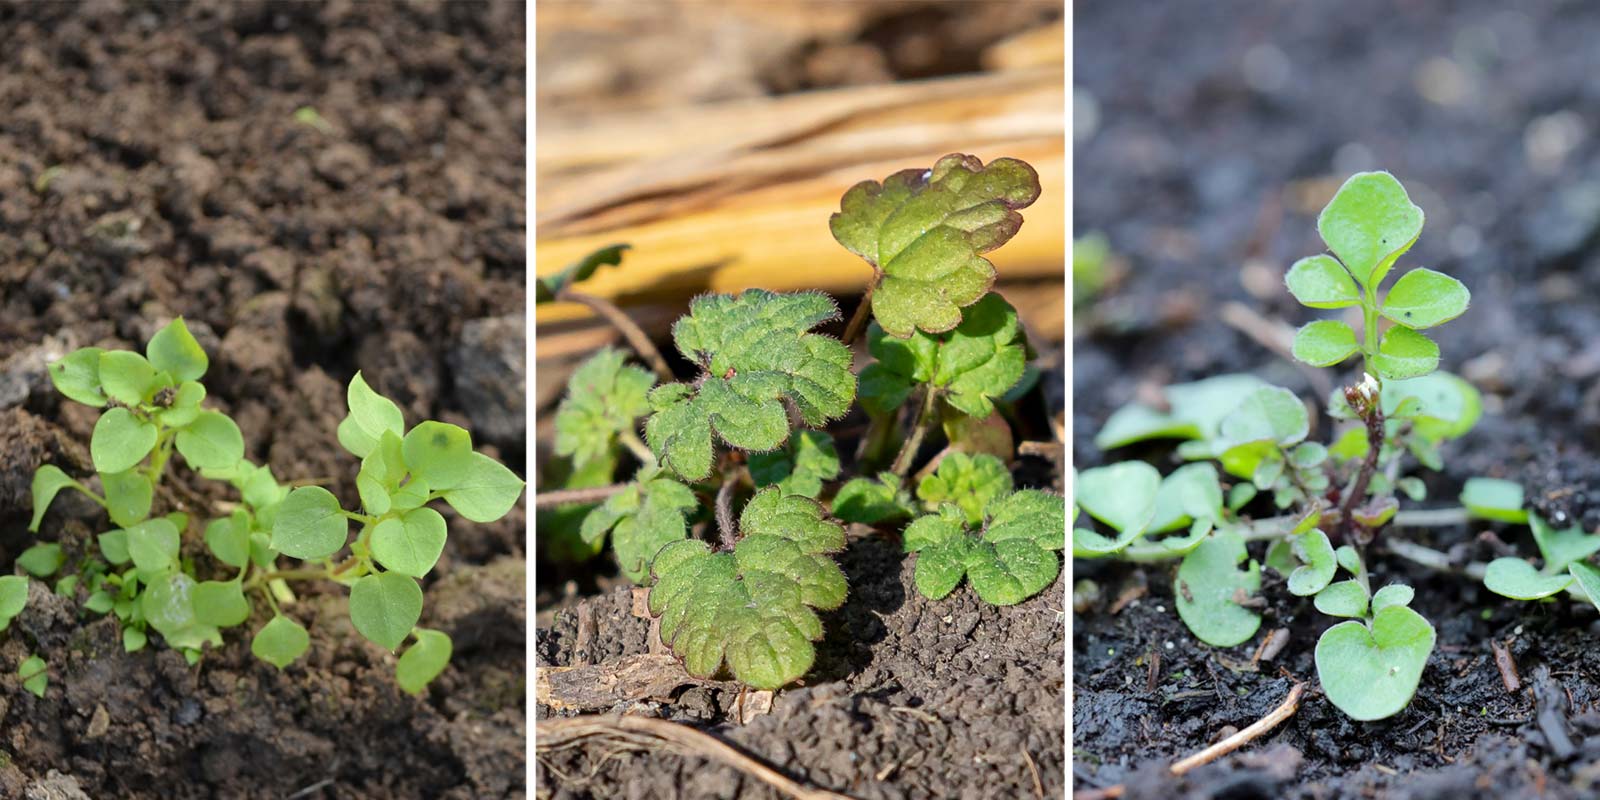 Seedlings of winter annual weeds, chickweed, henbit and hairy bittercress